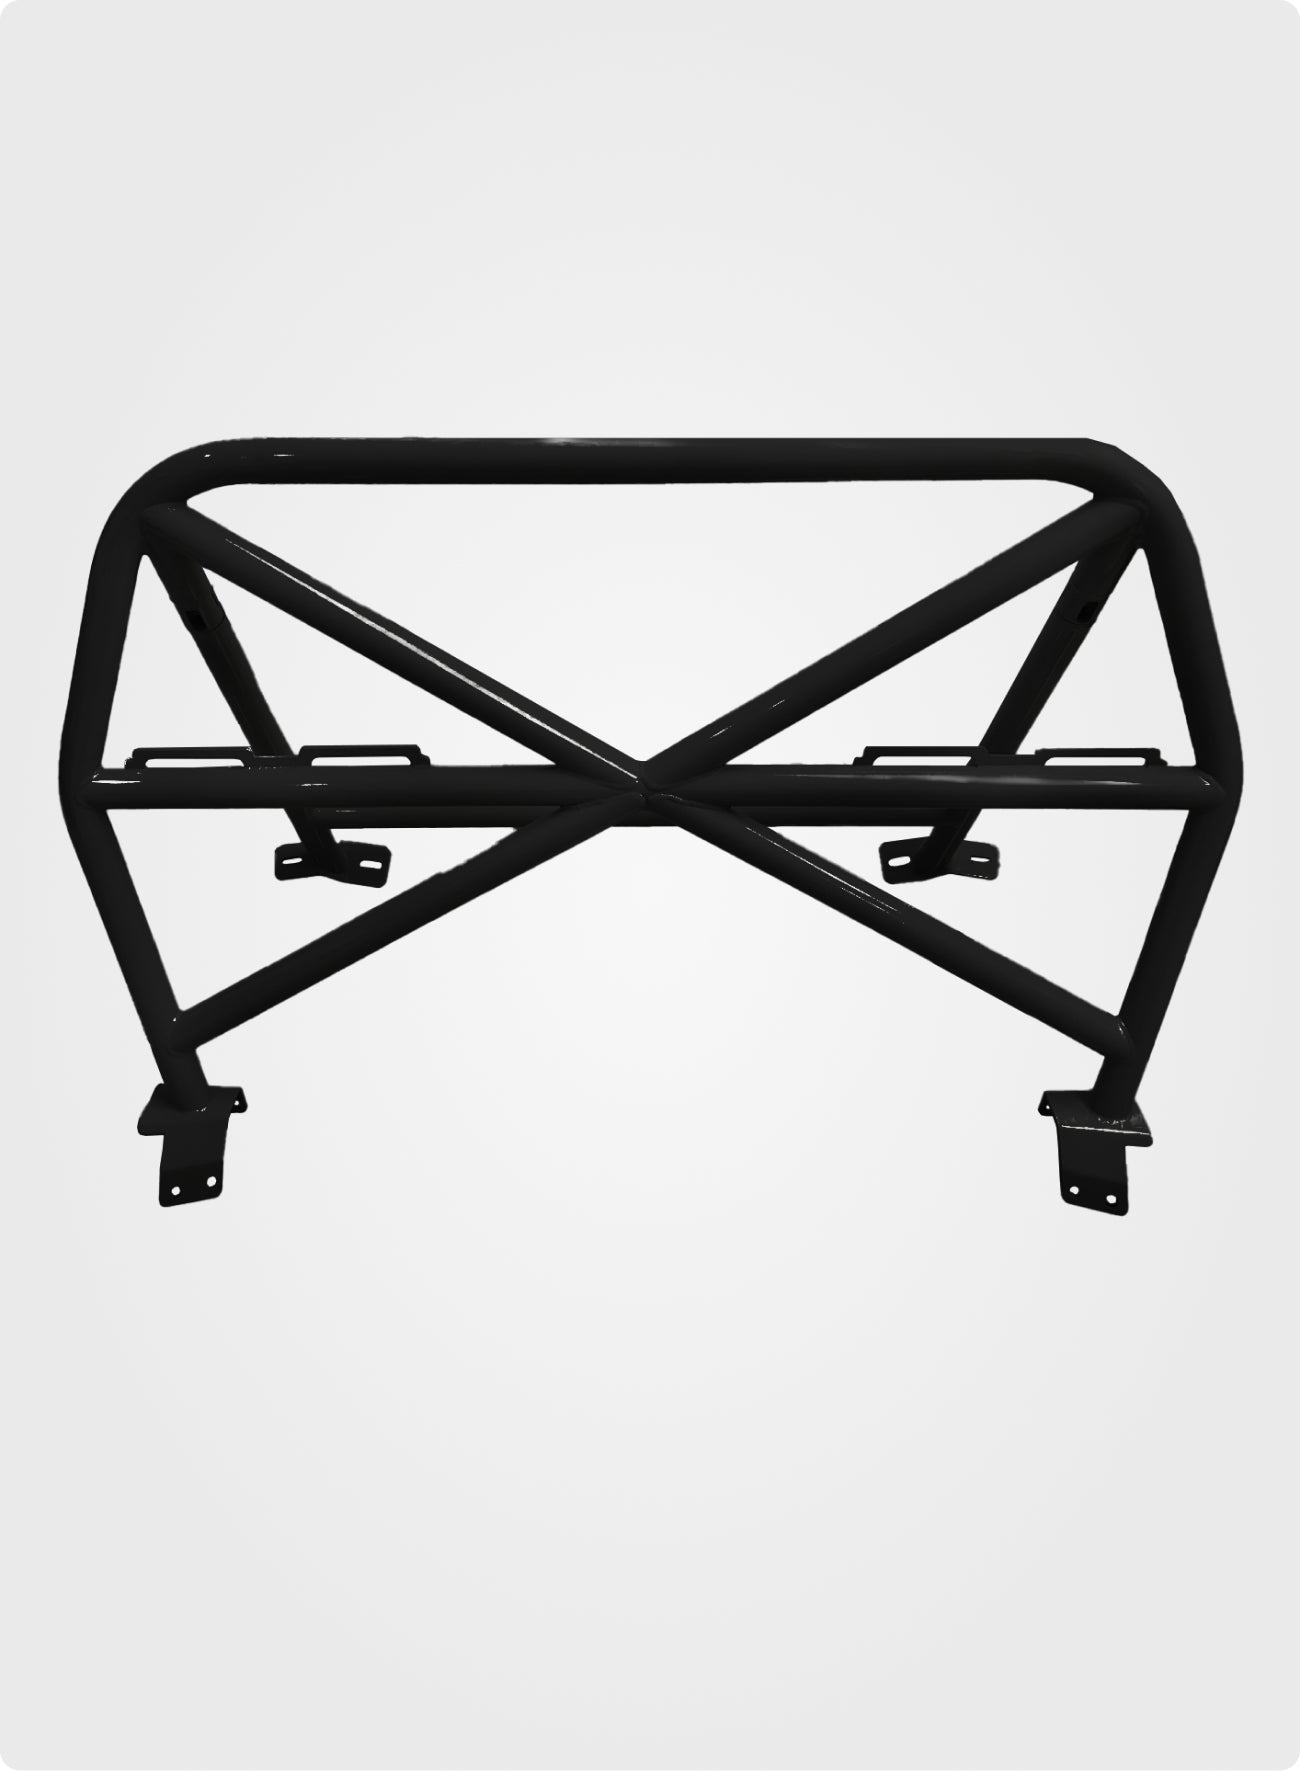 CMS Performance Roll Bar for S550 & S650 Mustang